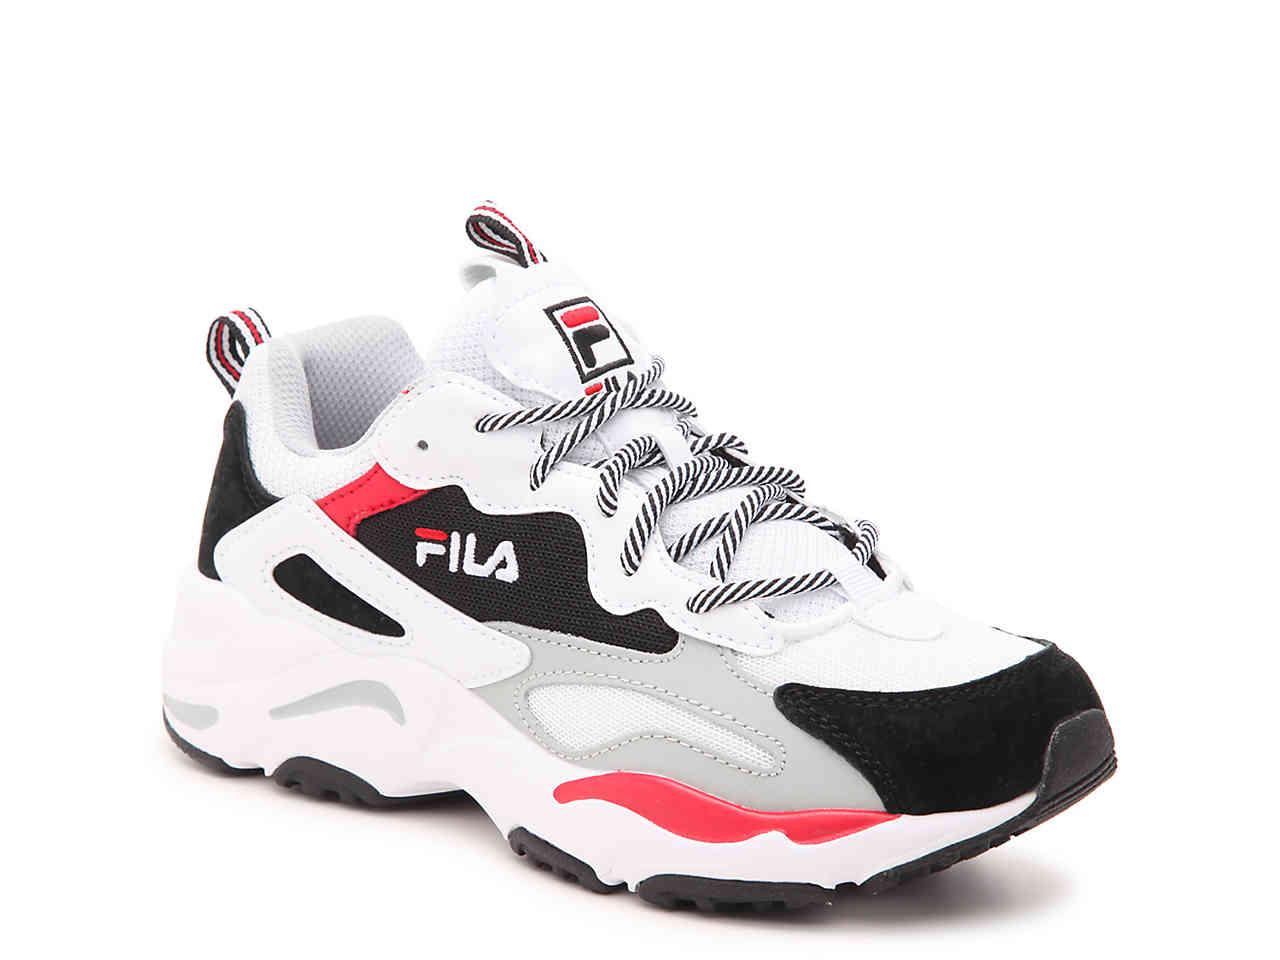 Fila Ray Tracer in Black/White/Red (White) - Lyst